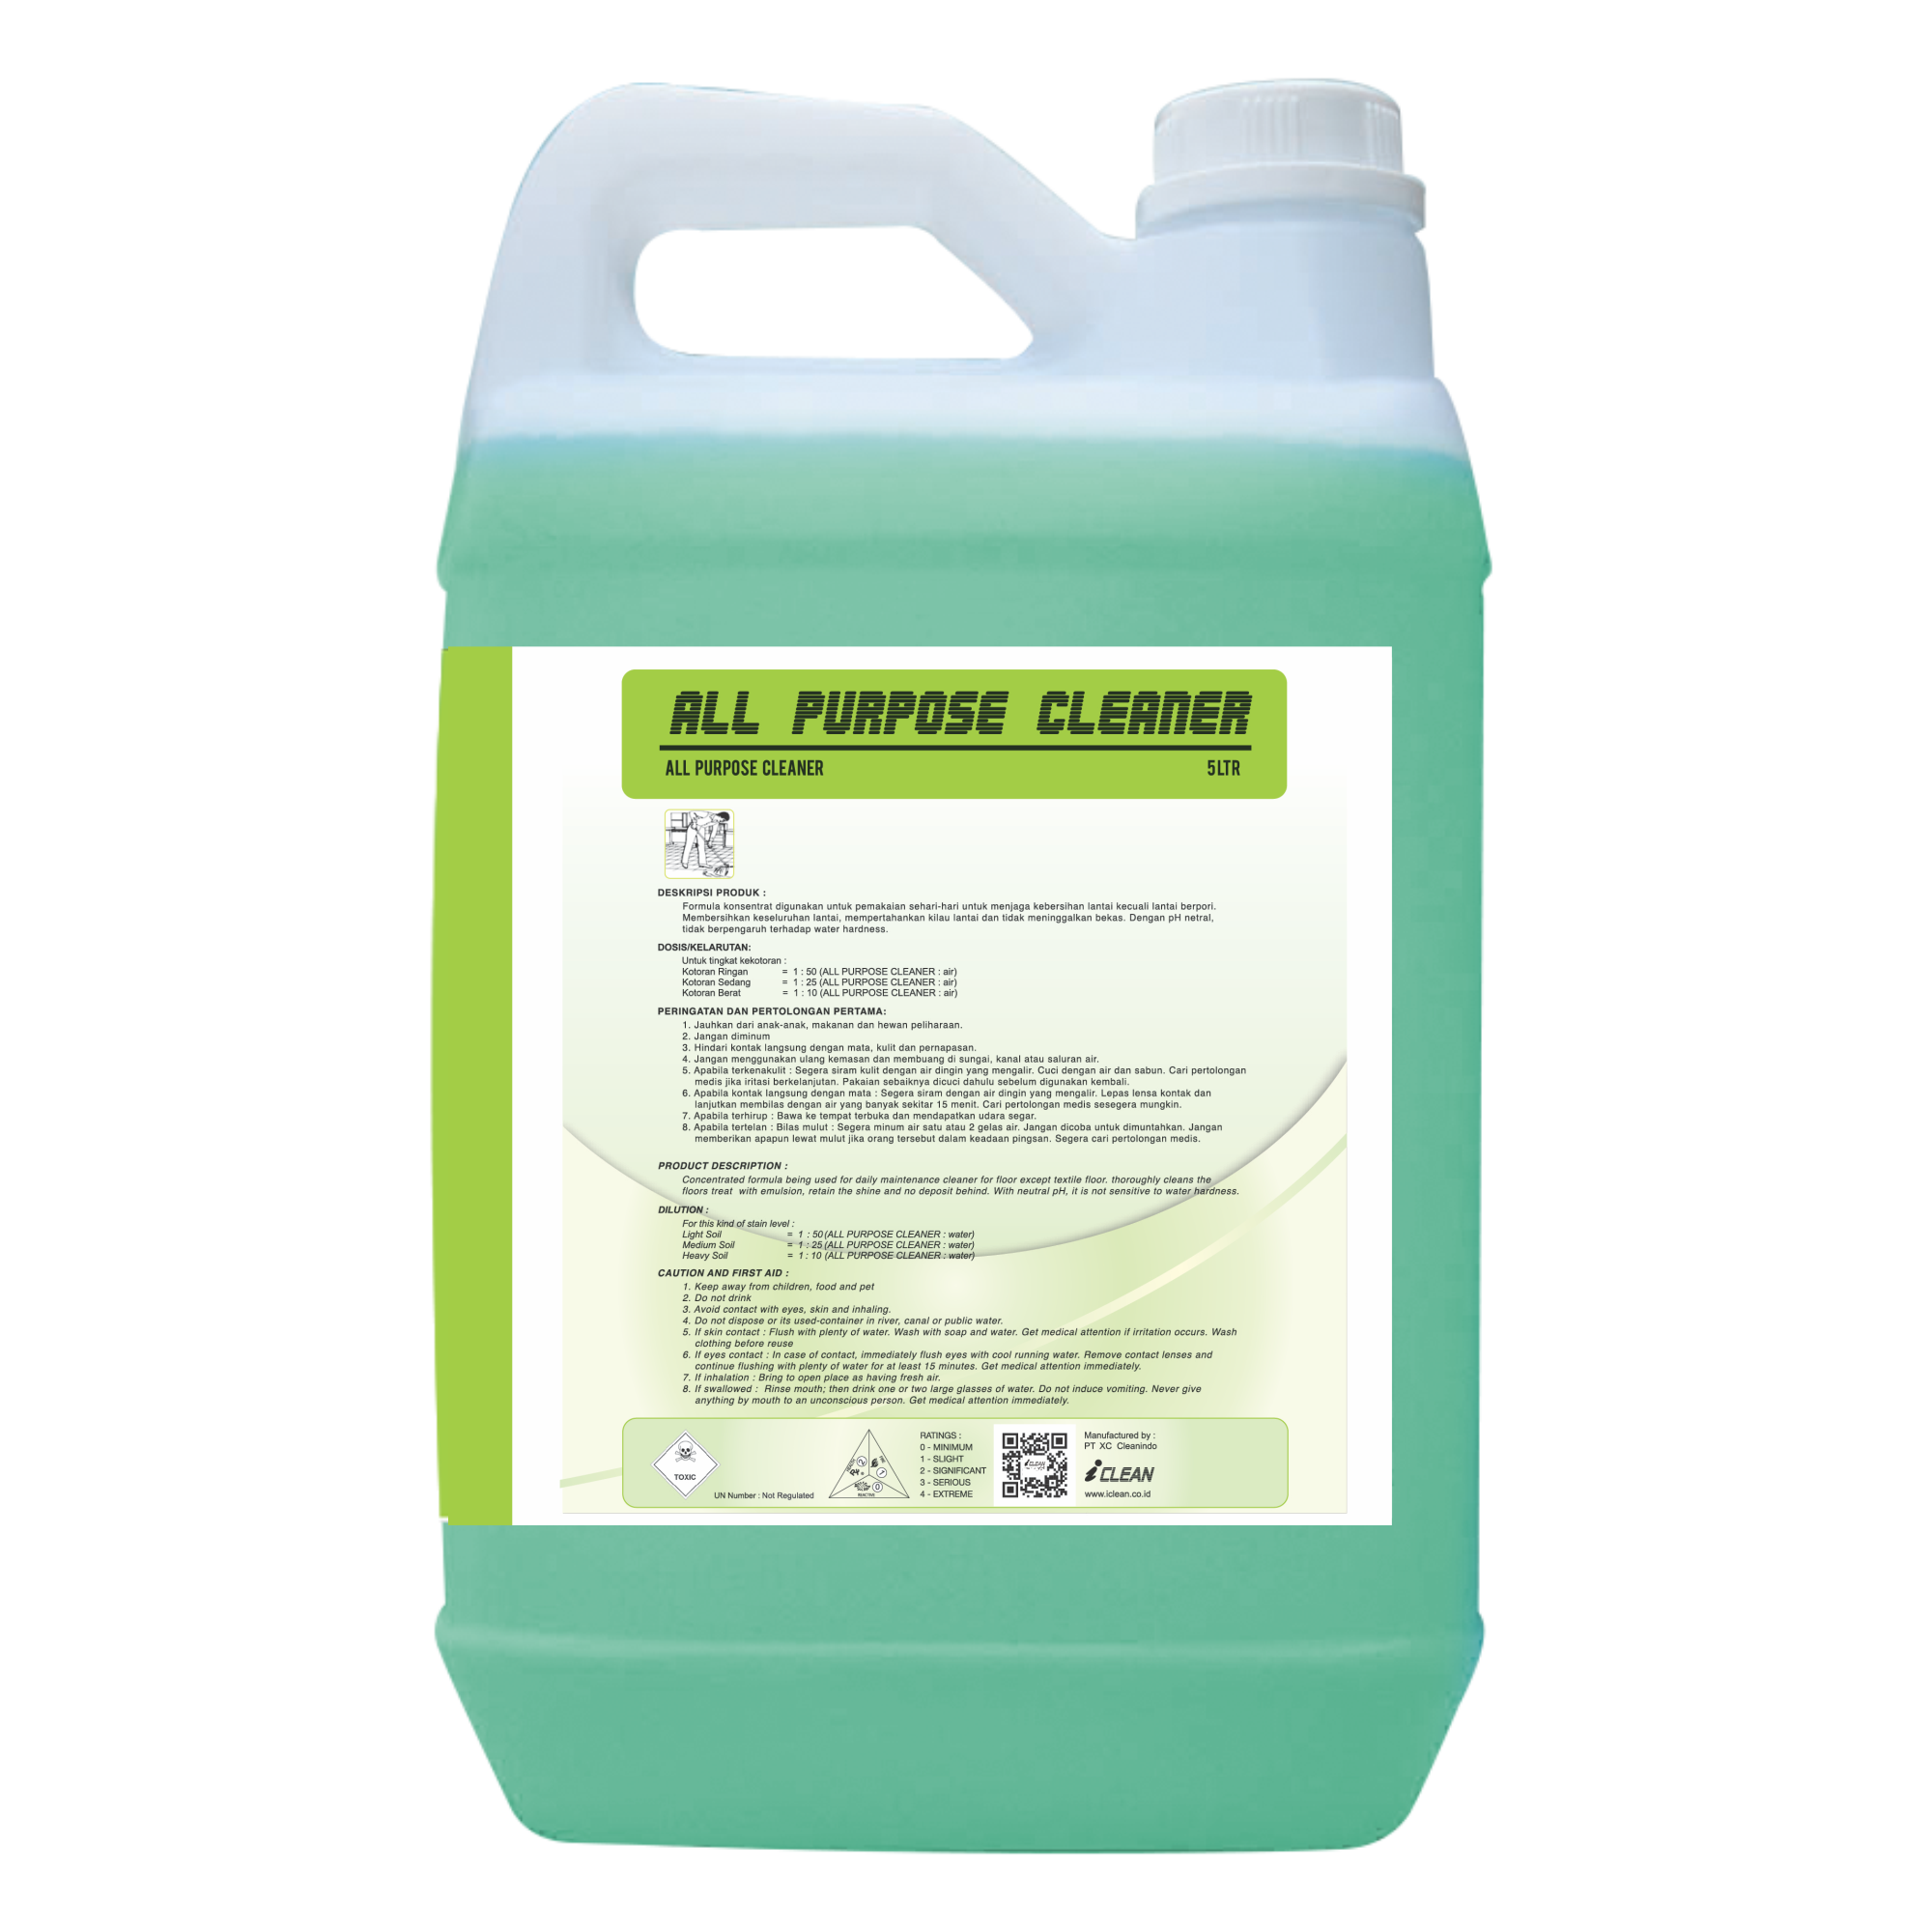 All Purpose Cleaner 5ltr 1 